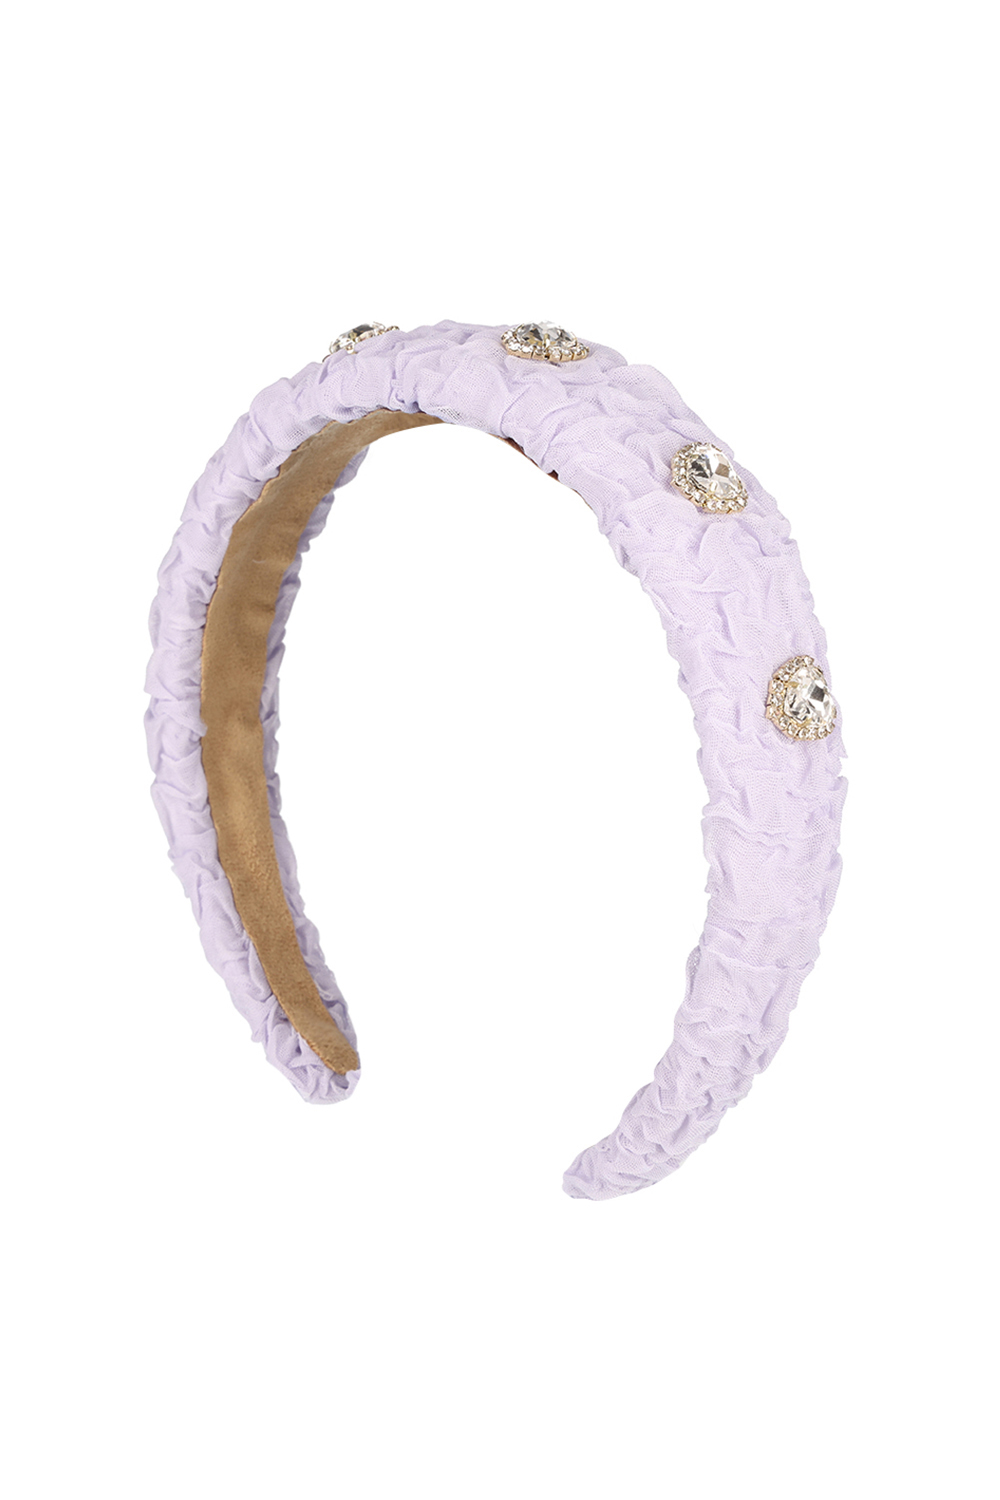 Twinkle Clotty Hair Band - LILAC